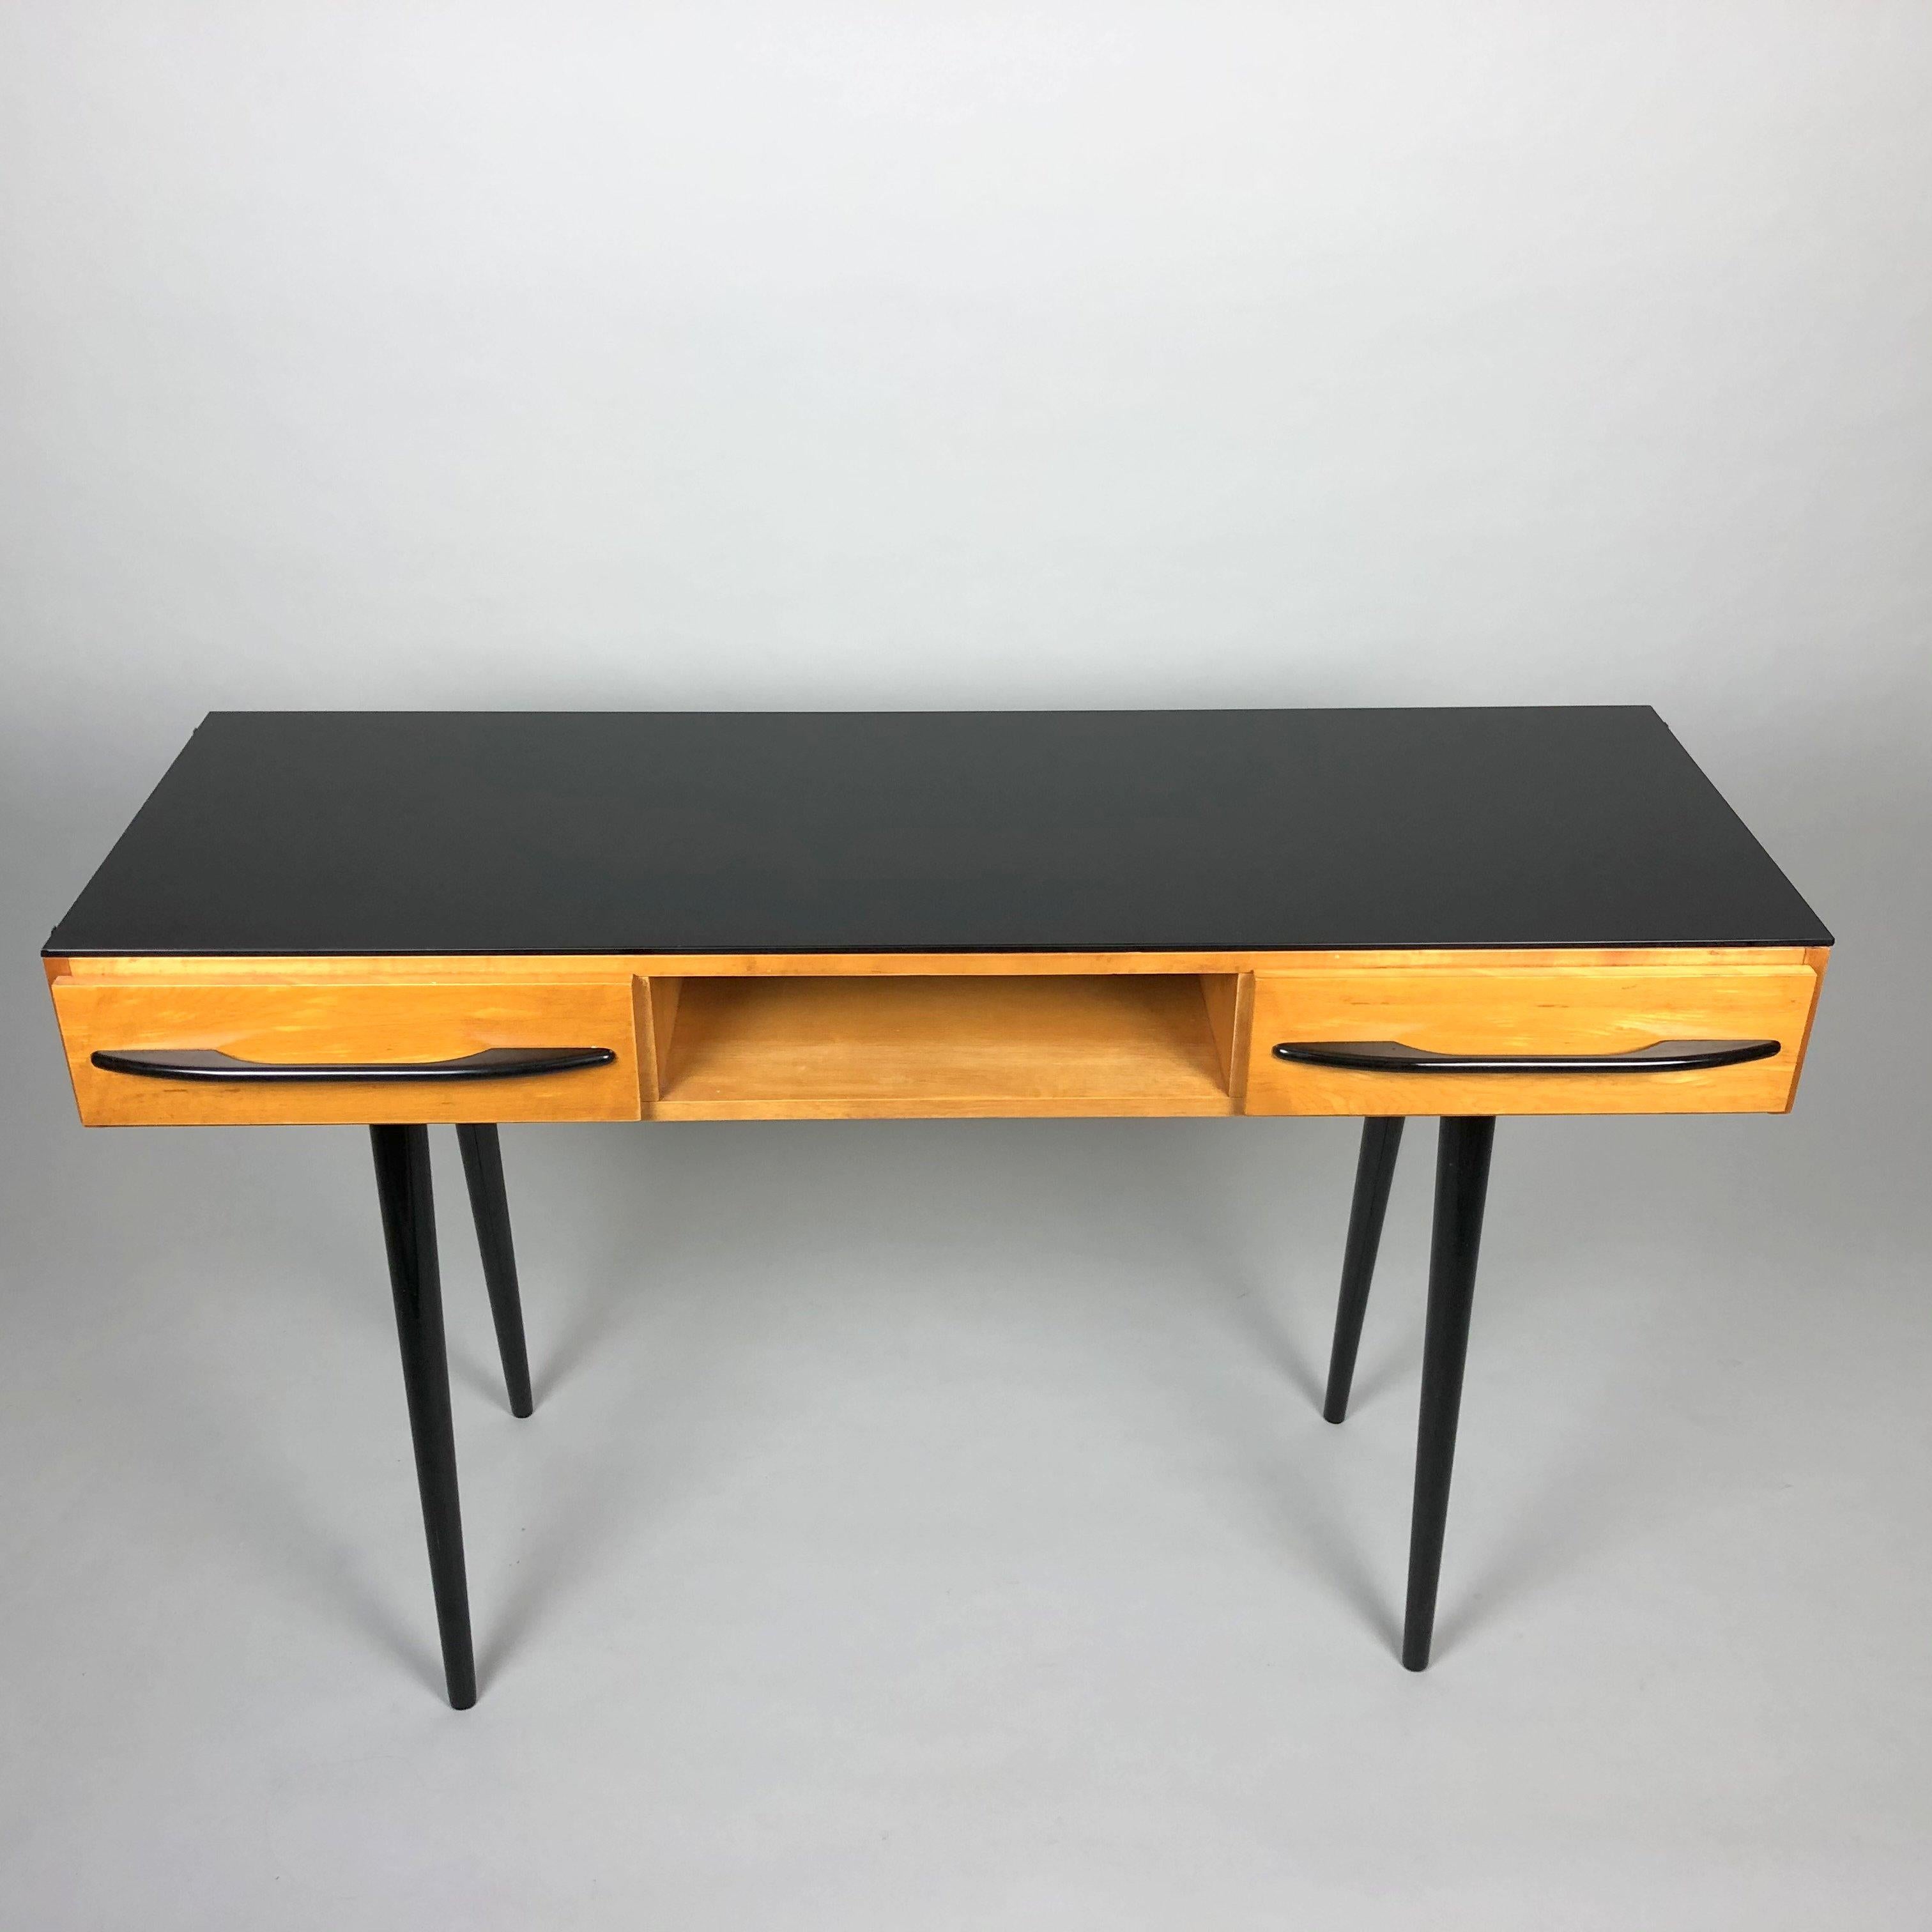 Vintage console table or writing desk designed by Architekt Mojmir Pozar in Czechoslovakia in the 1960s. Good original condition. The table top is made of opaxite glass. Wooden parts are re-polished.